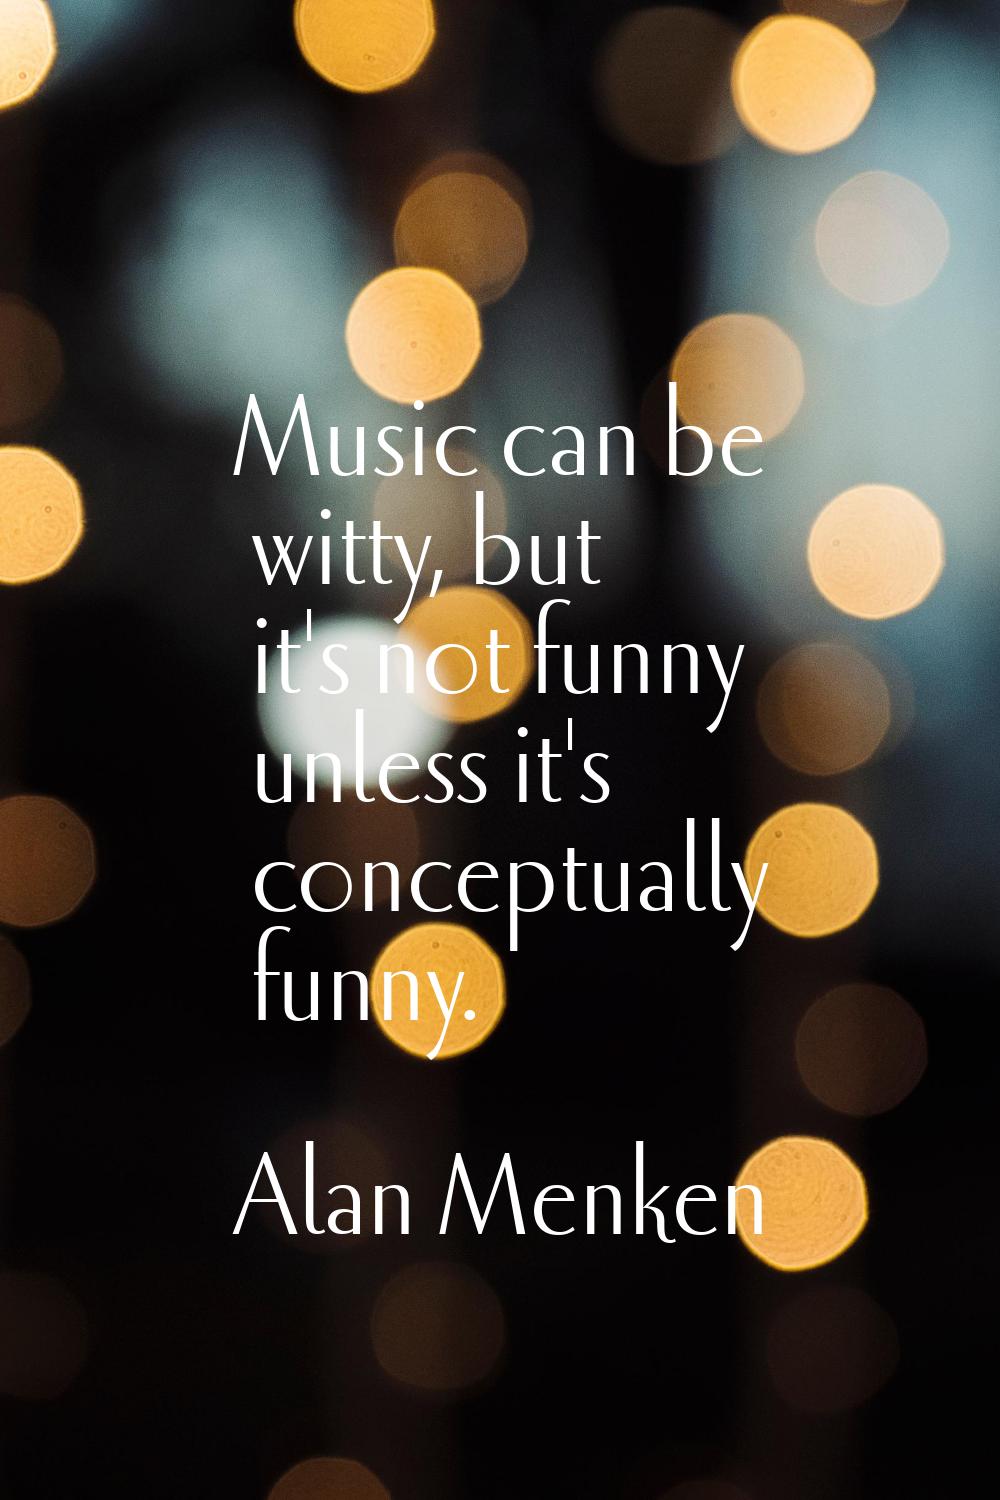 Music can be witty, but it's not funny unless it's conceptually funny.